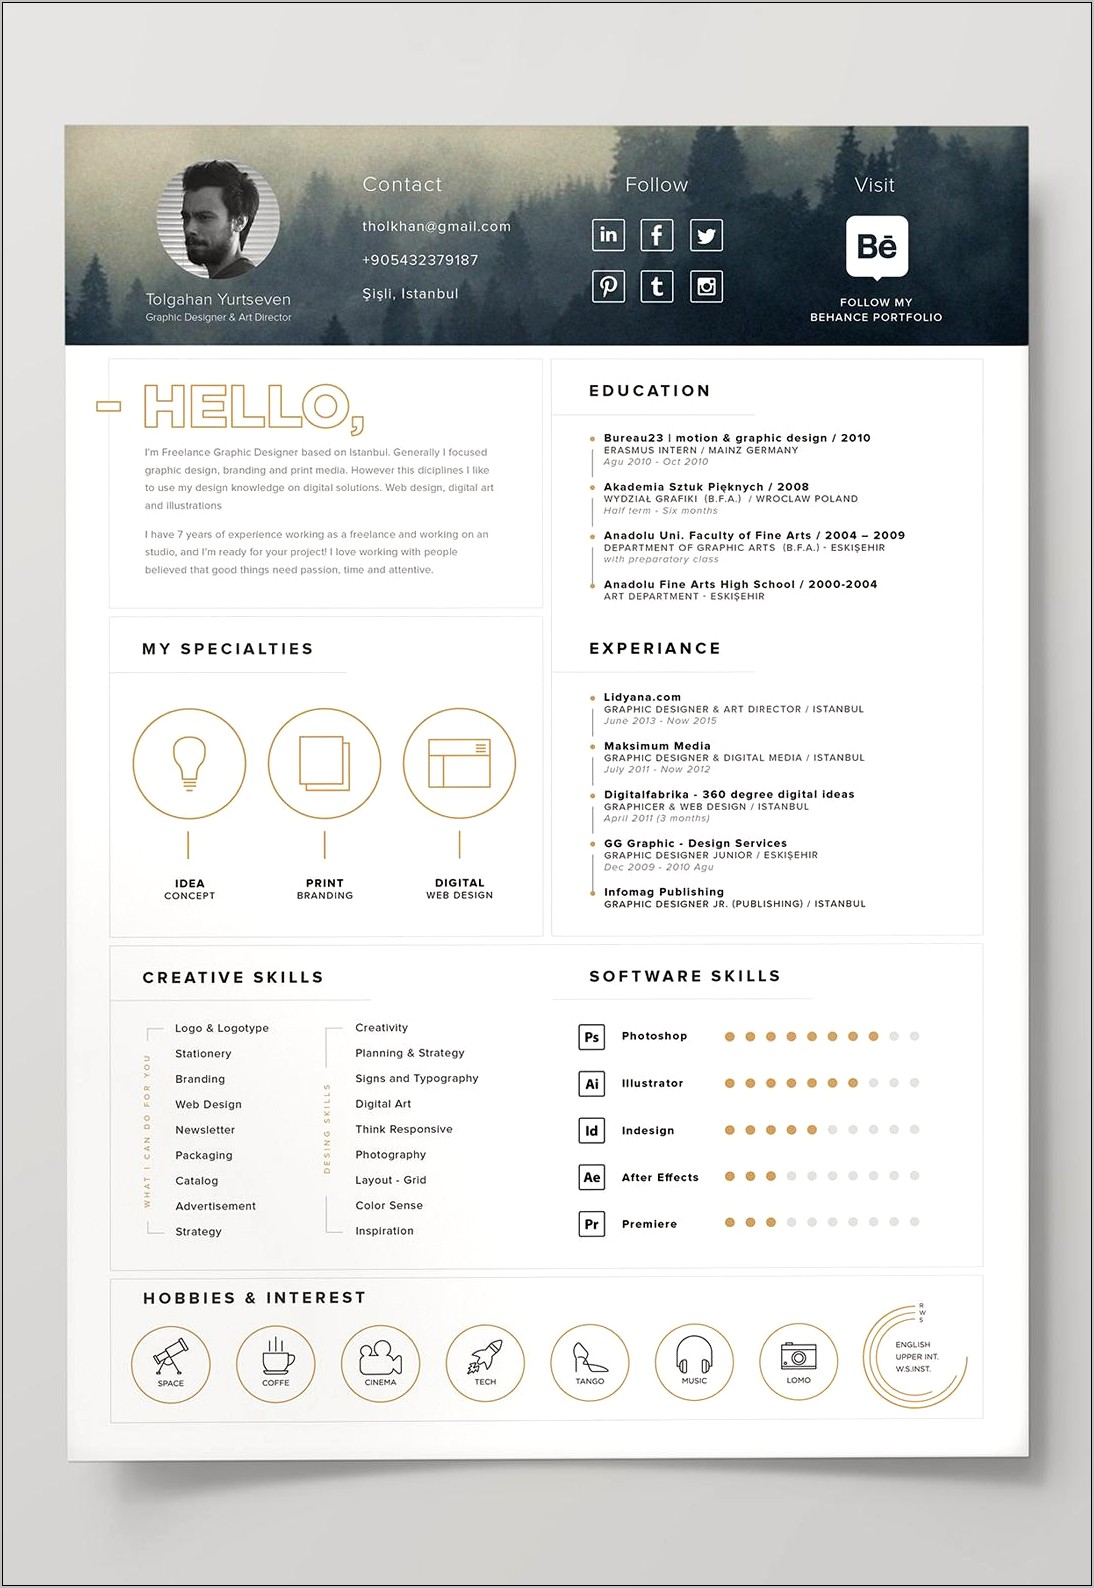 after effects cv template free download